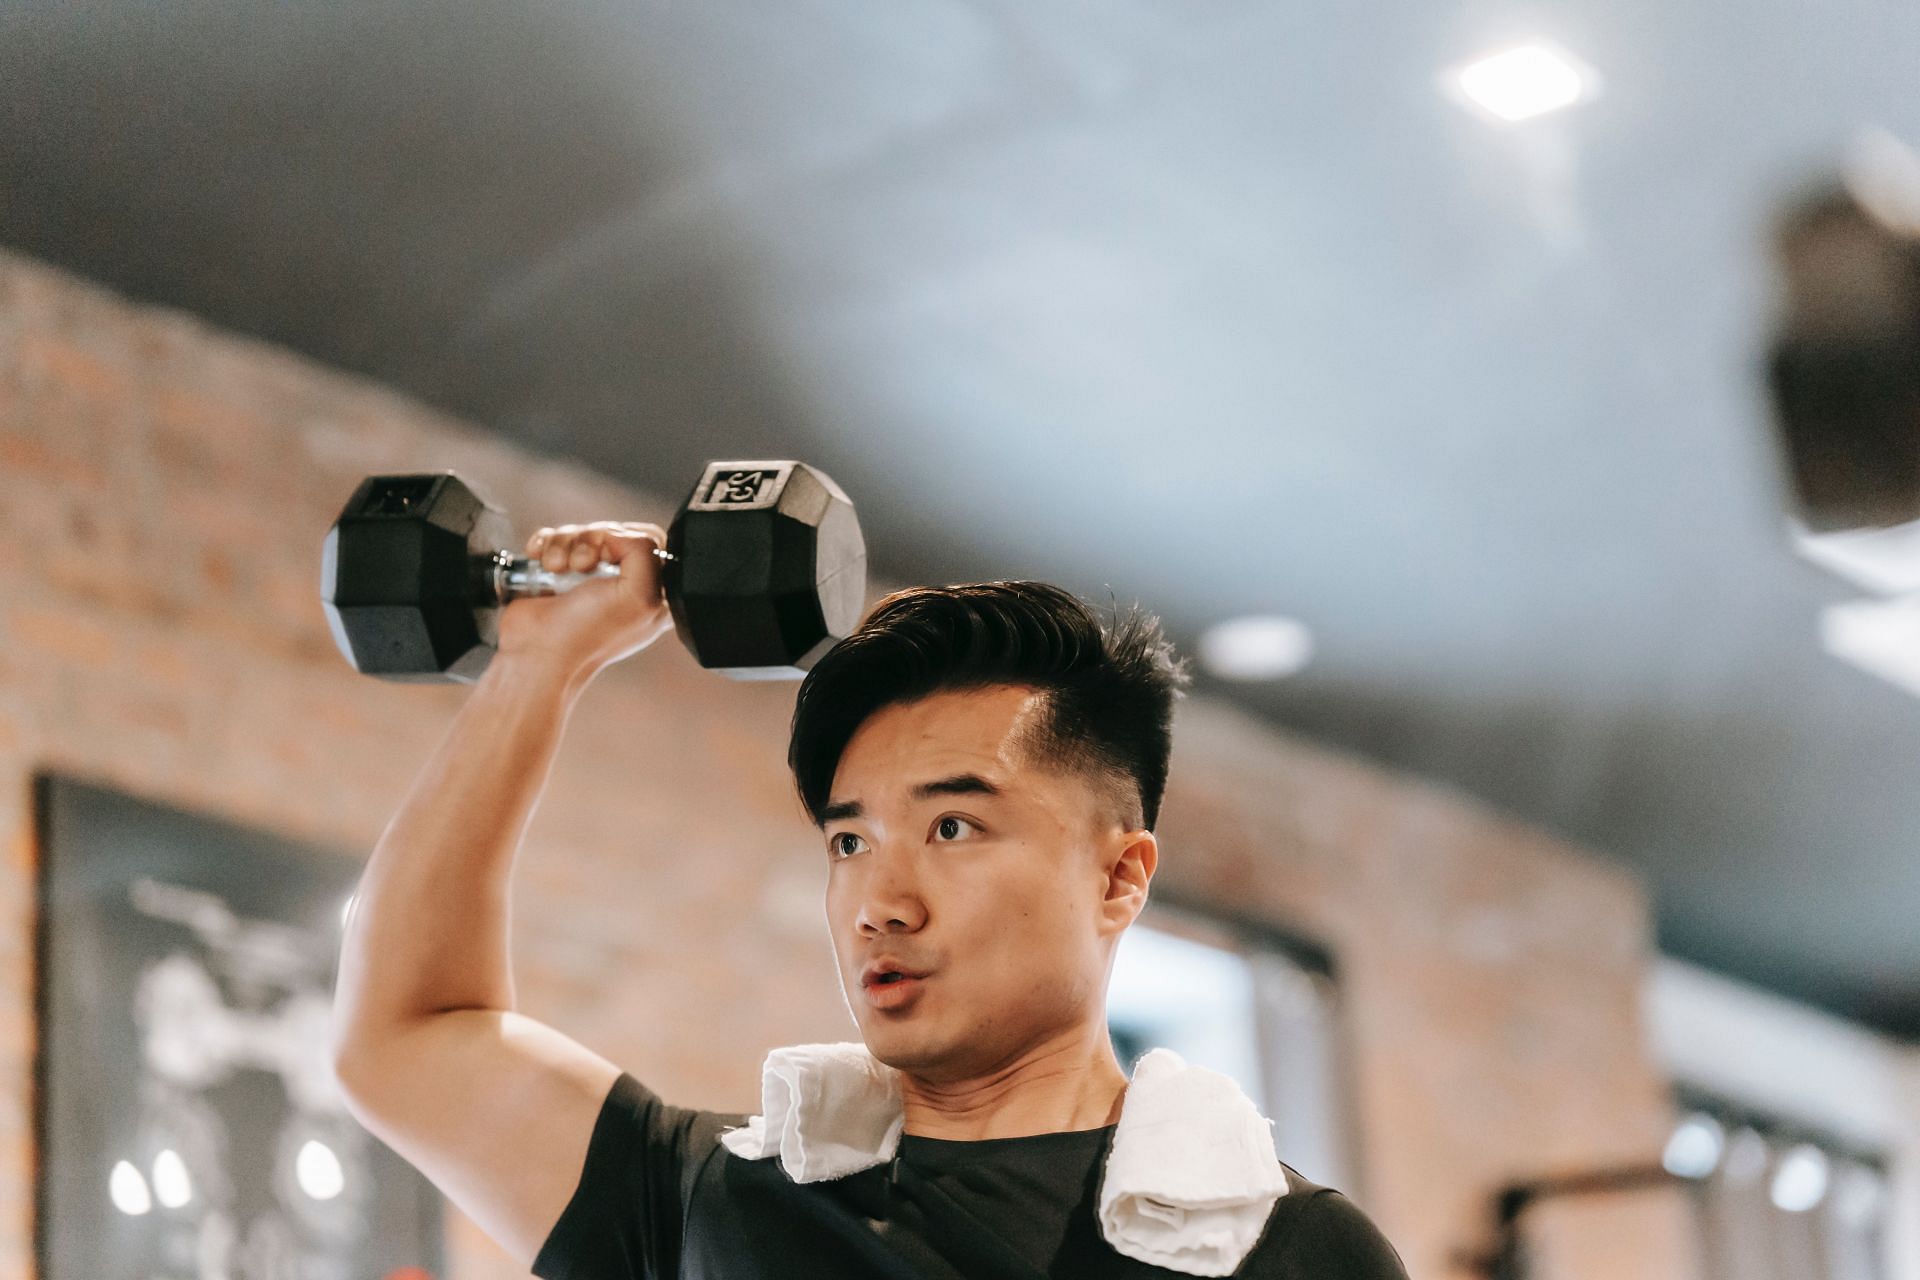 Dumbbell exercise (Image via Pexels/Andres Ayrton)